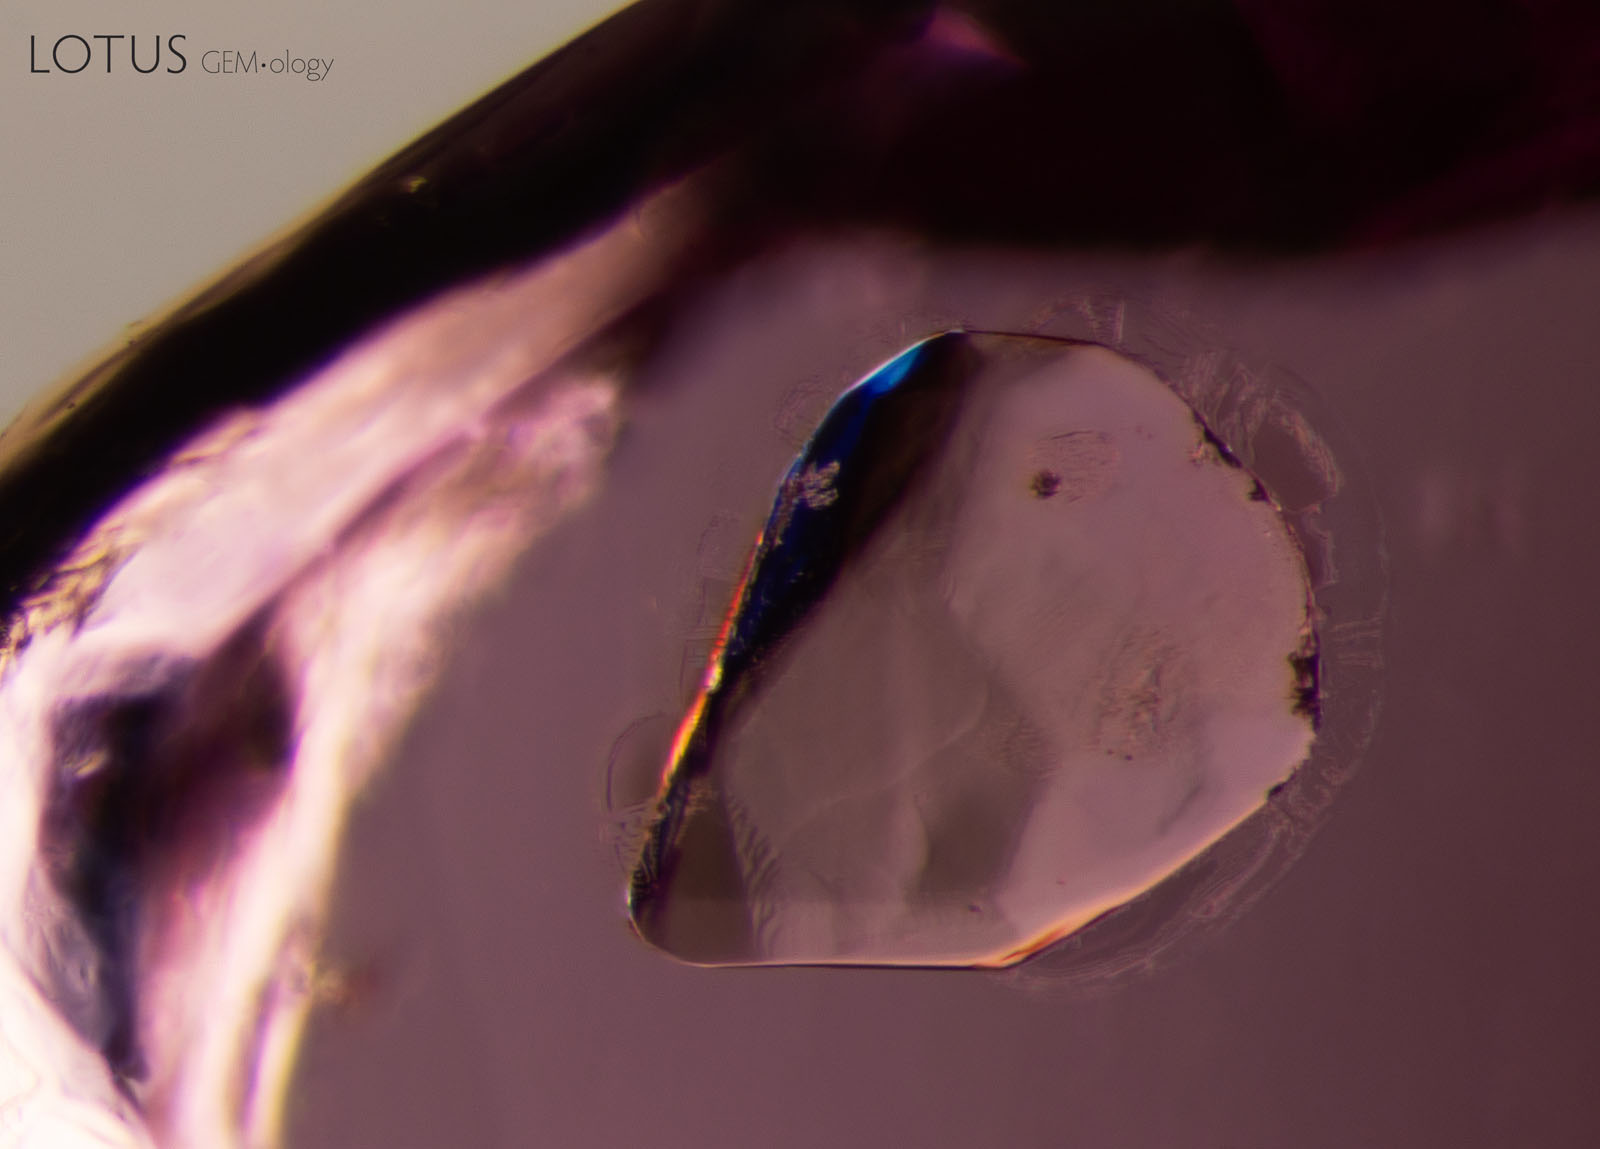 (1100°C) The first signs of change, with small fissures forming on the edges of the crystal. Subtle changes to the texture are also visible inside the crystal, which appears less smooth.